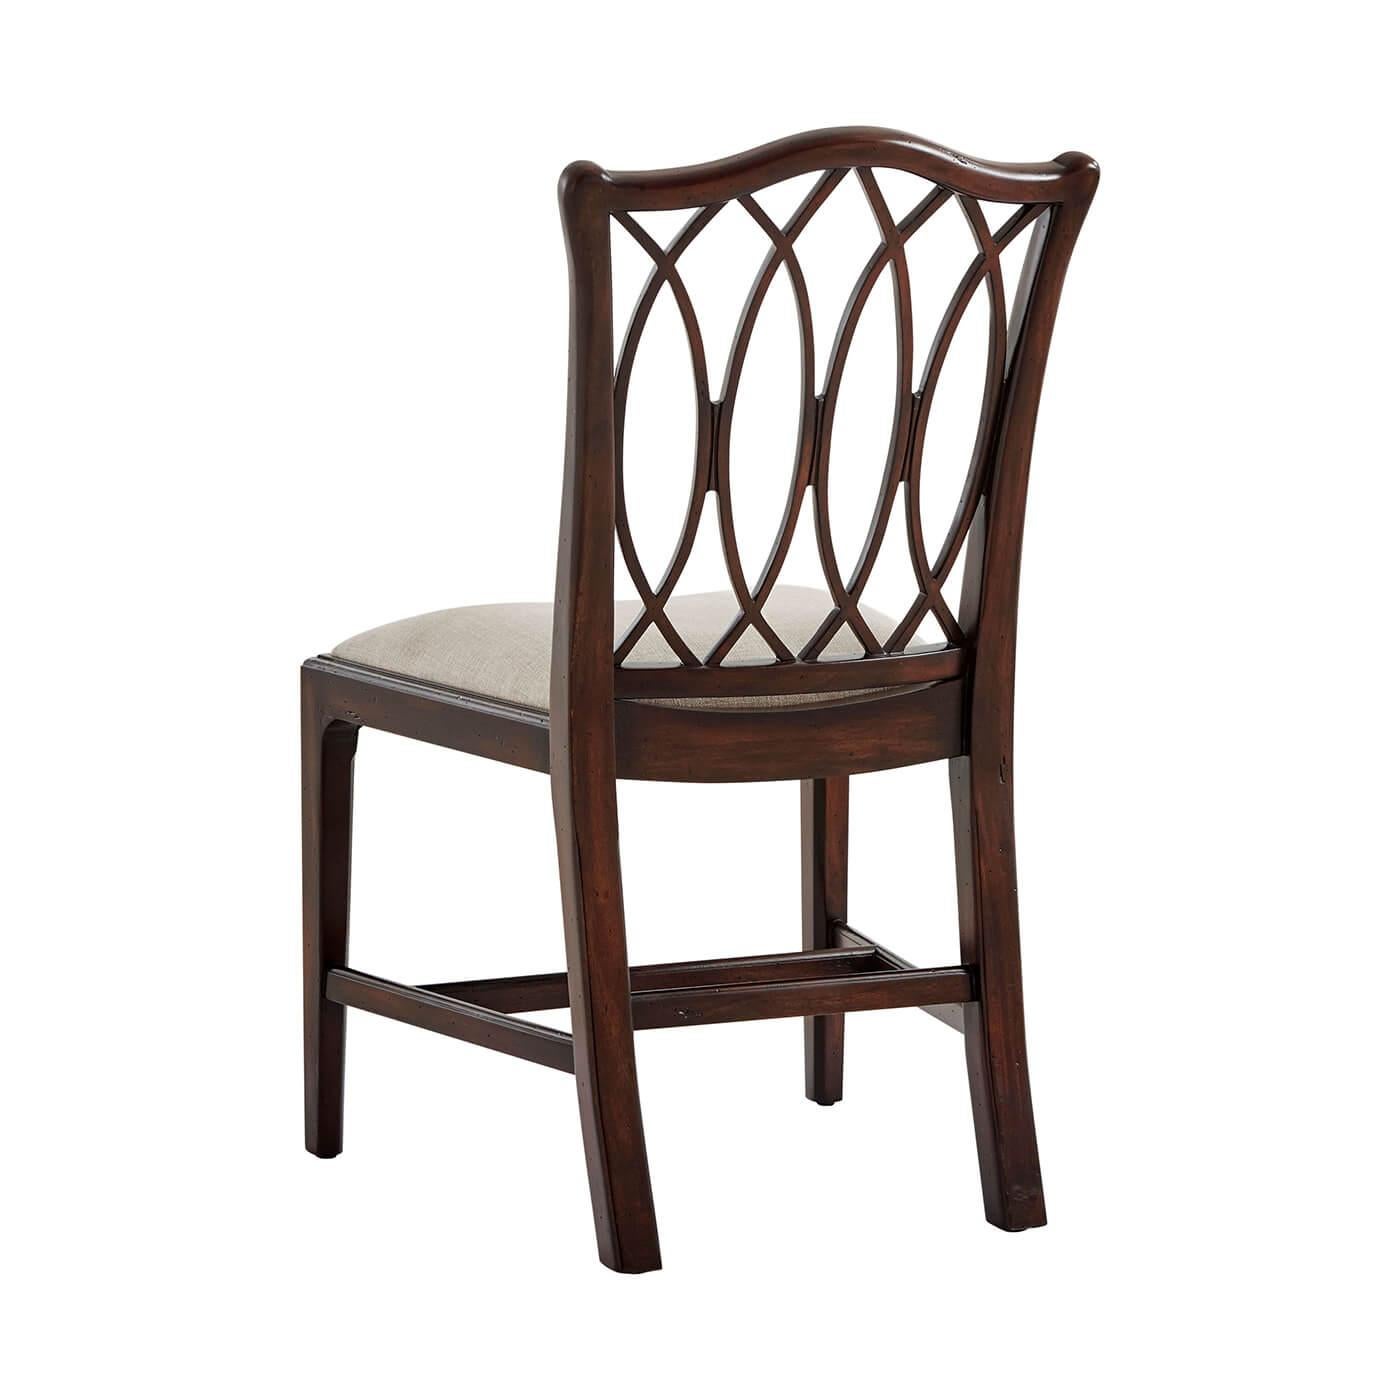 George III style mahogany dining chair with a serpentine side chair, with an interlacing trellis back, above a bowed upholstered seat, on chamfered legs. The original George III circa 1780.
Dimensions: 21.25